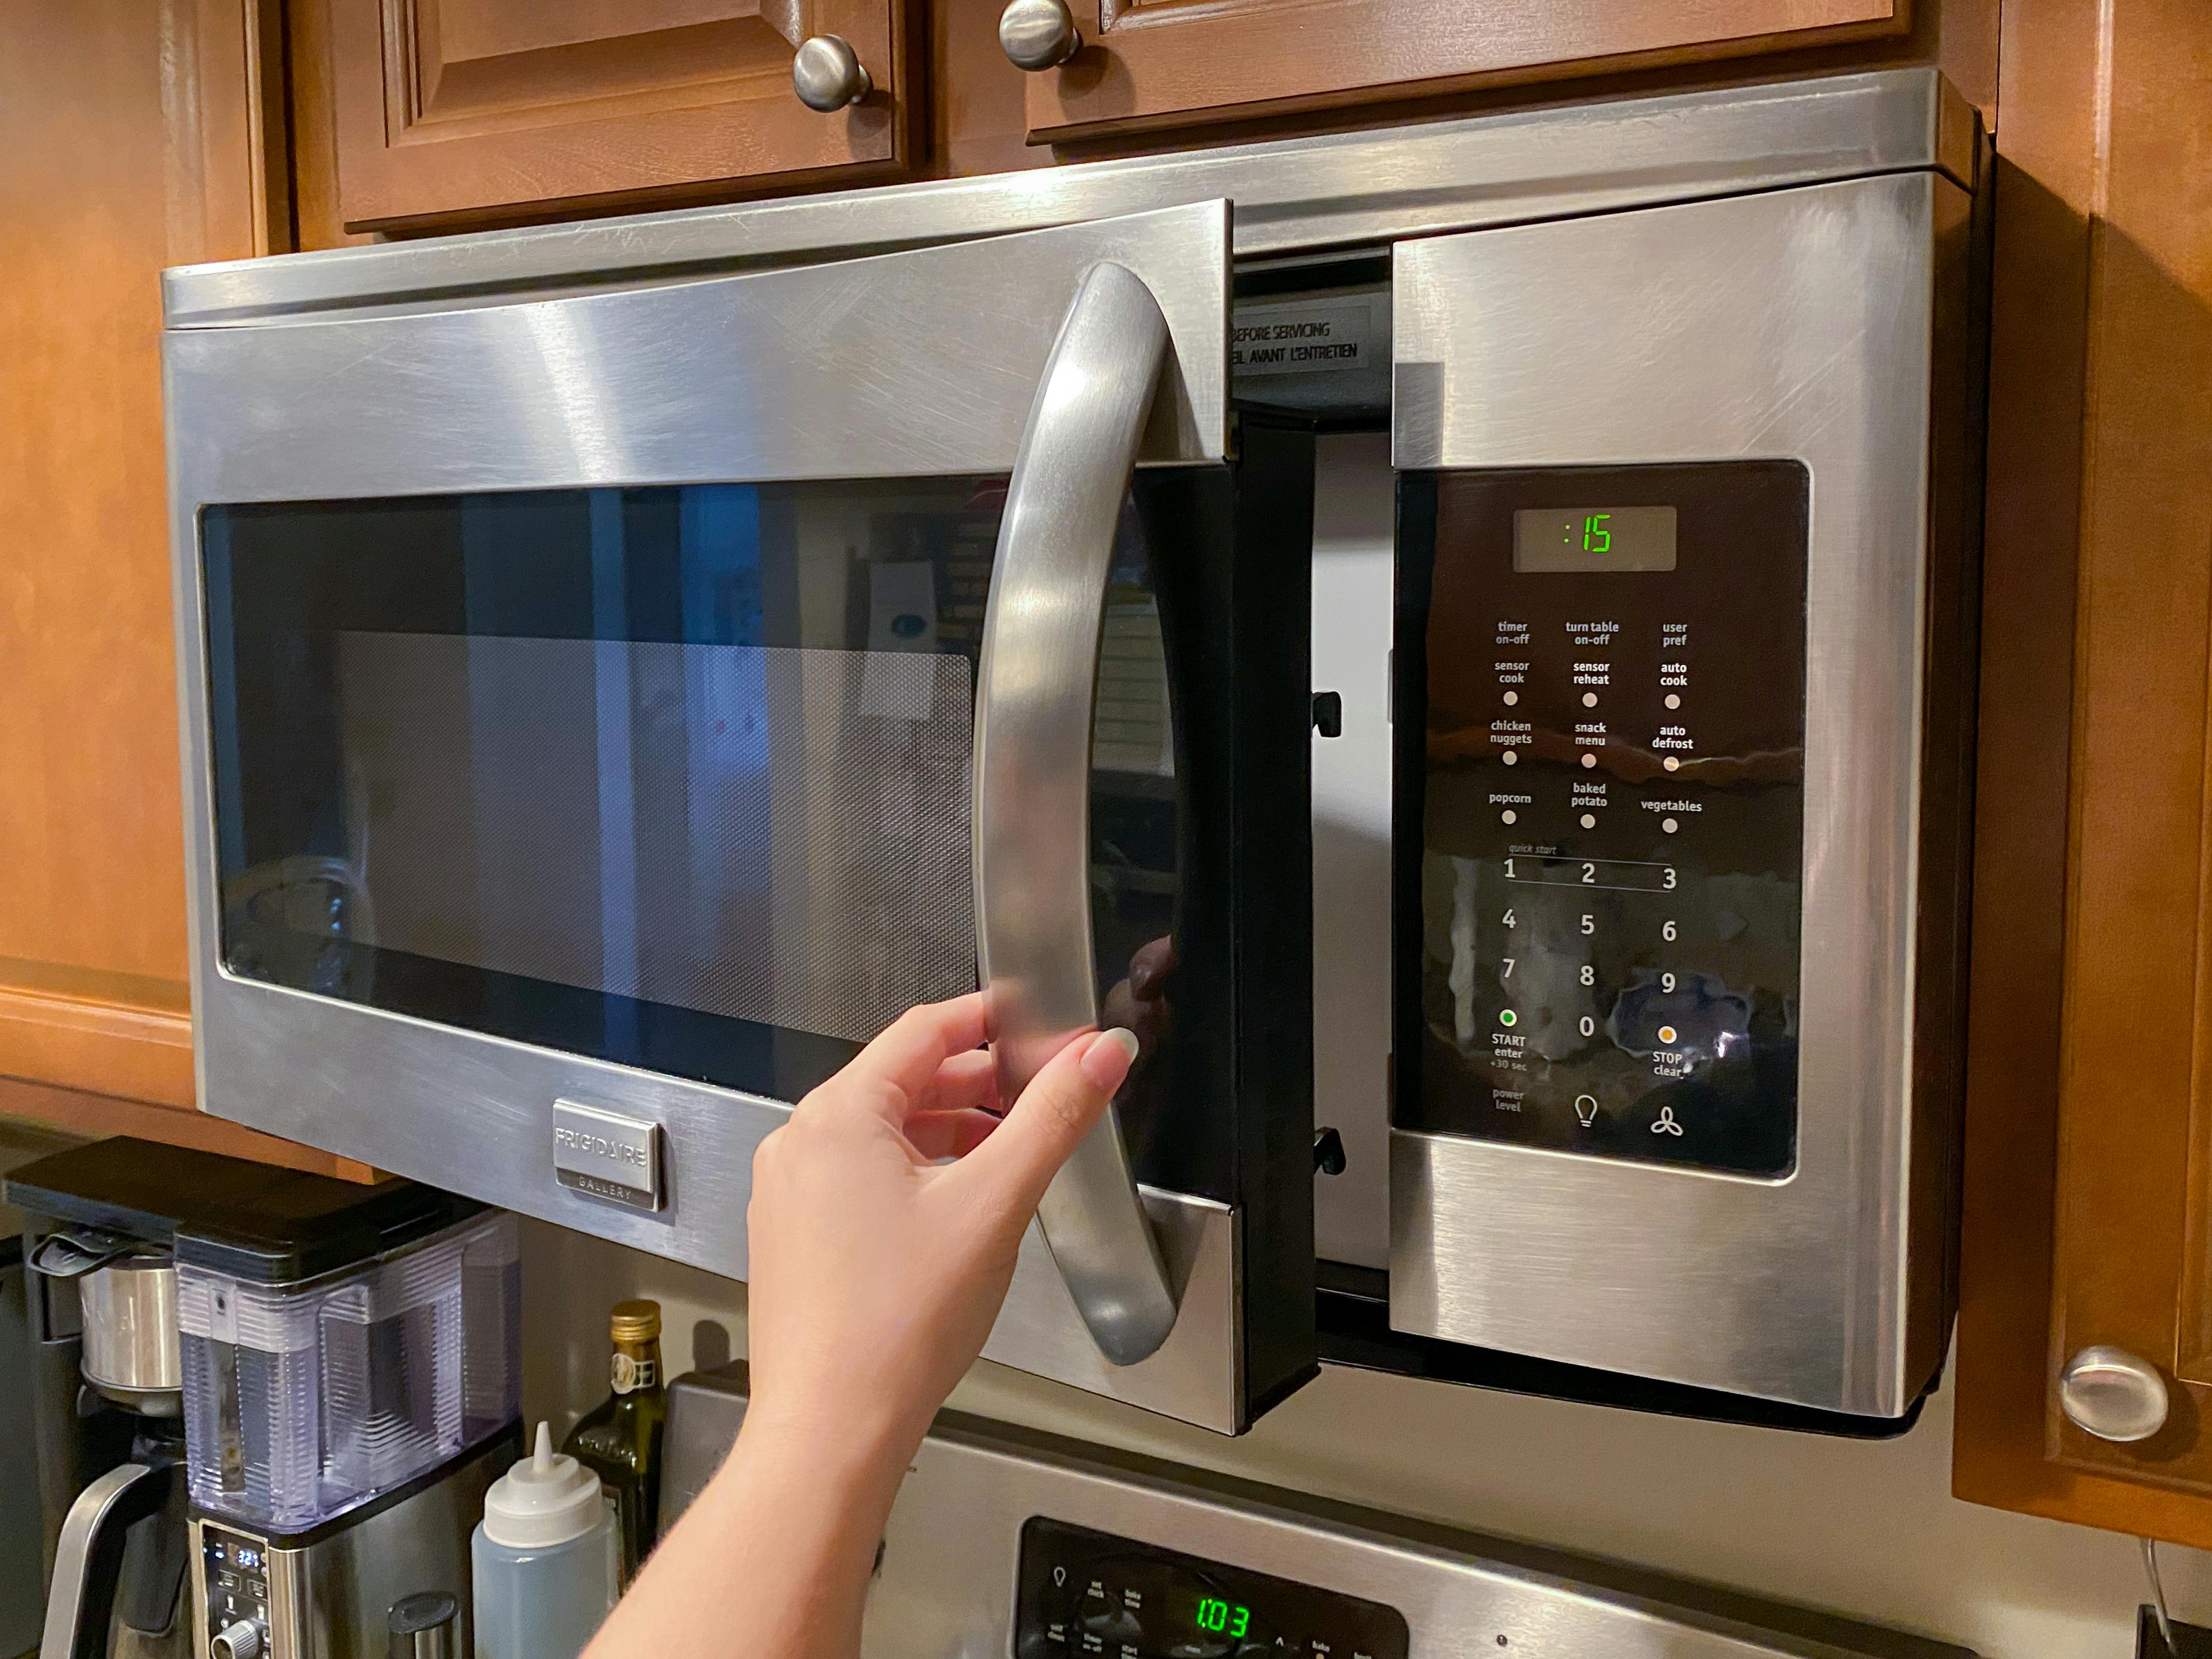 A person's hand opening the door of a mounted microwave.